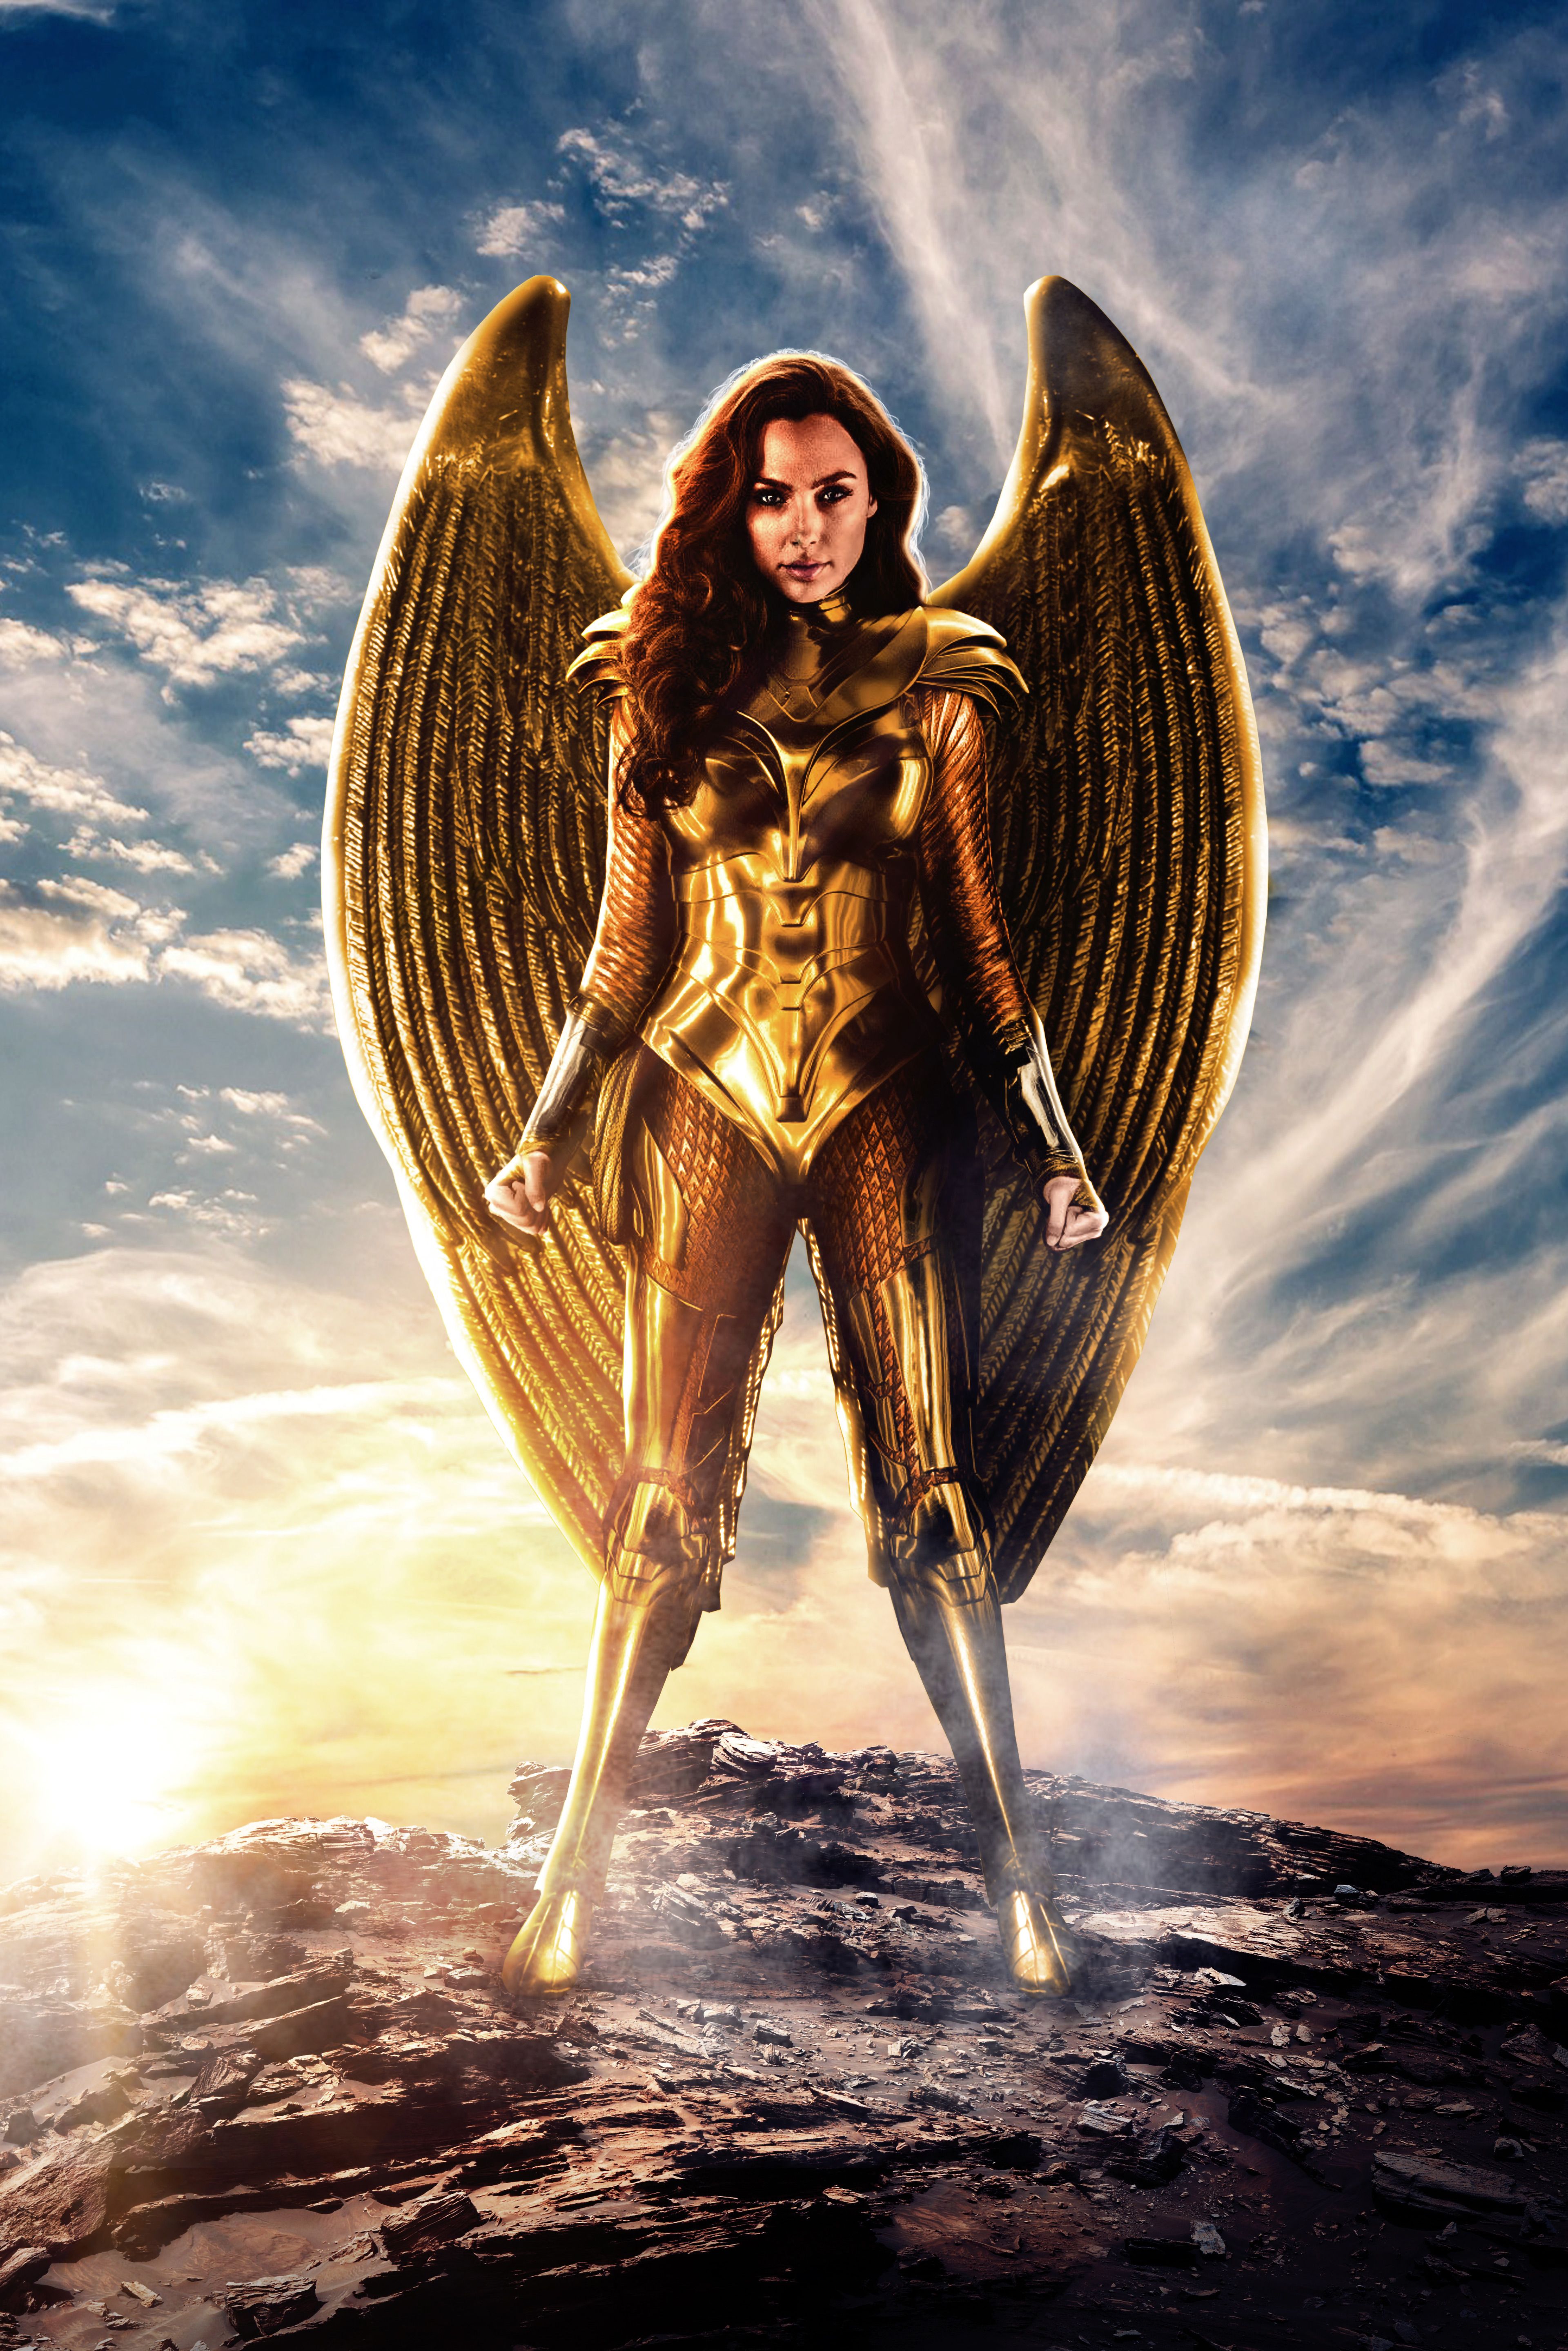 Wonder Woman Golden Eagle Armor Wallpaper, HD Movies 4K Wallpapers, Image, Photos and Backgrounds